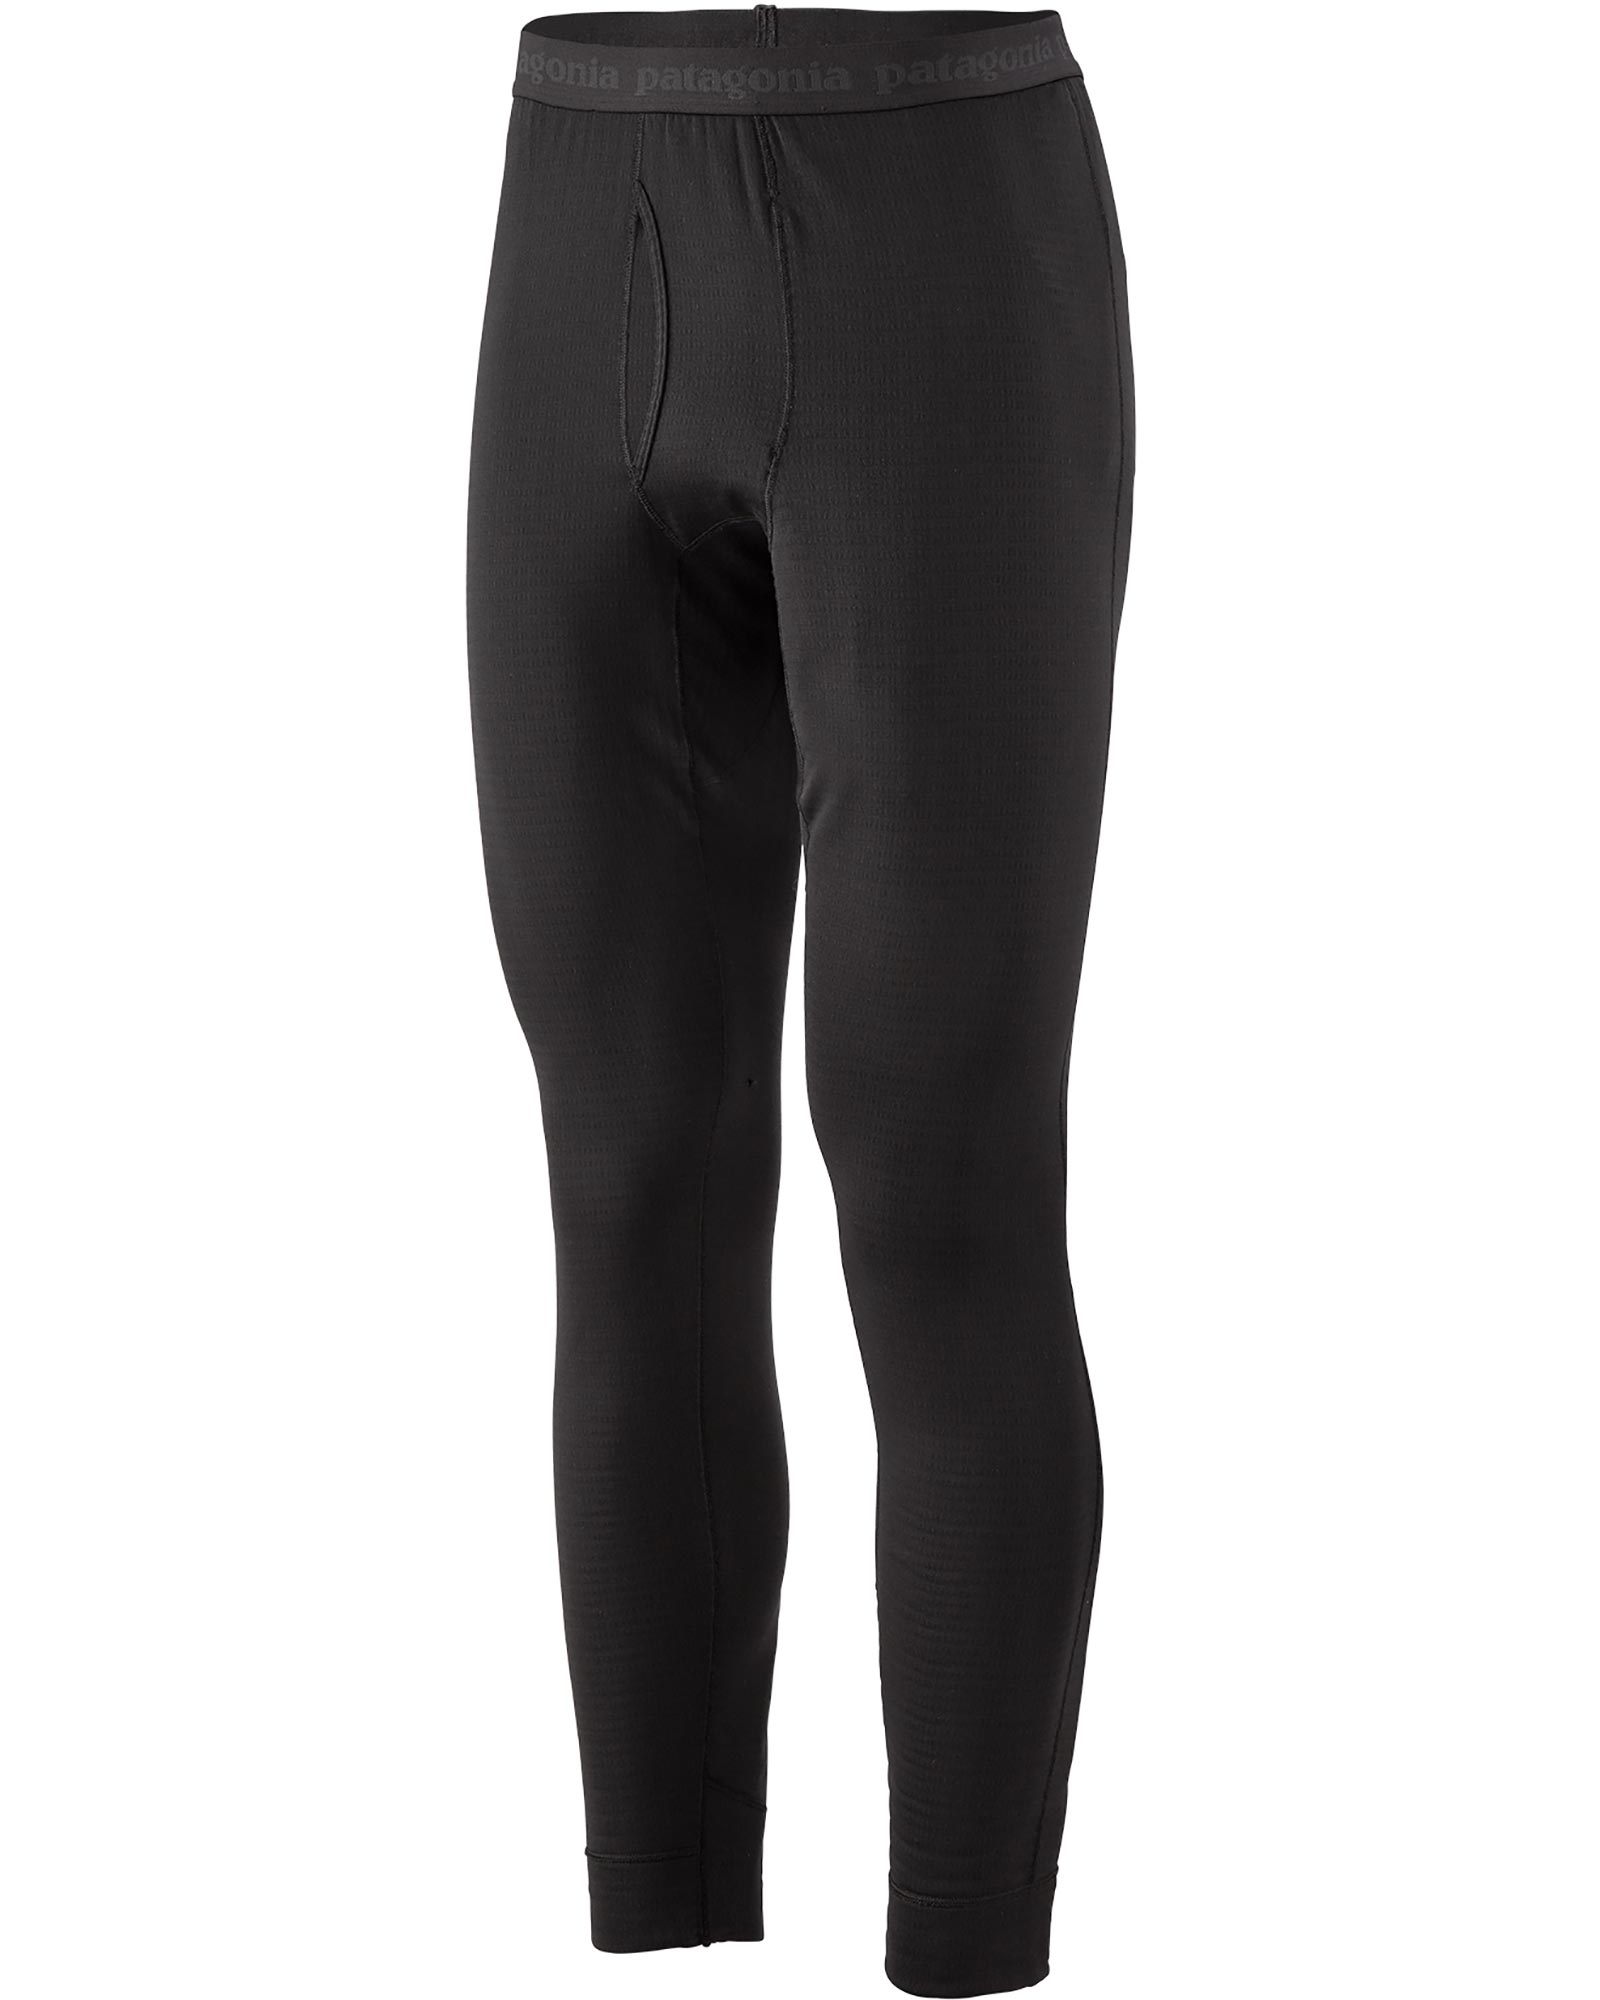 Patagonia Capilene Mens Thermal Weight Tights